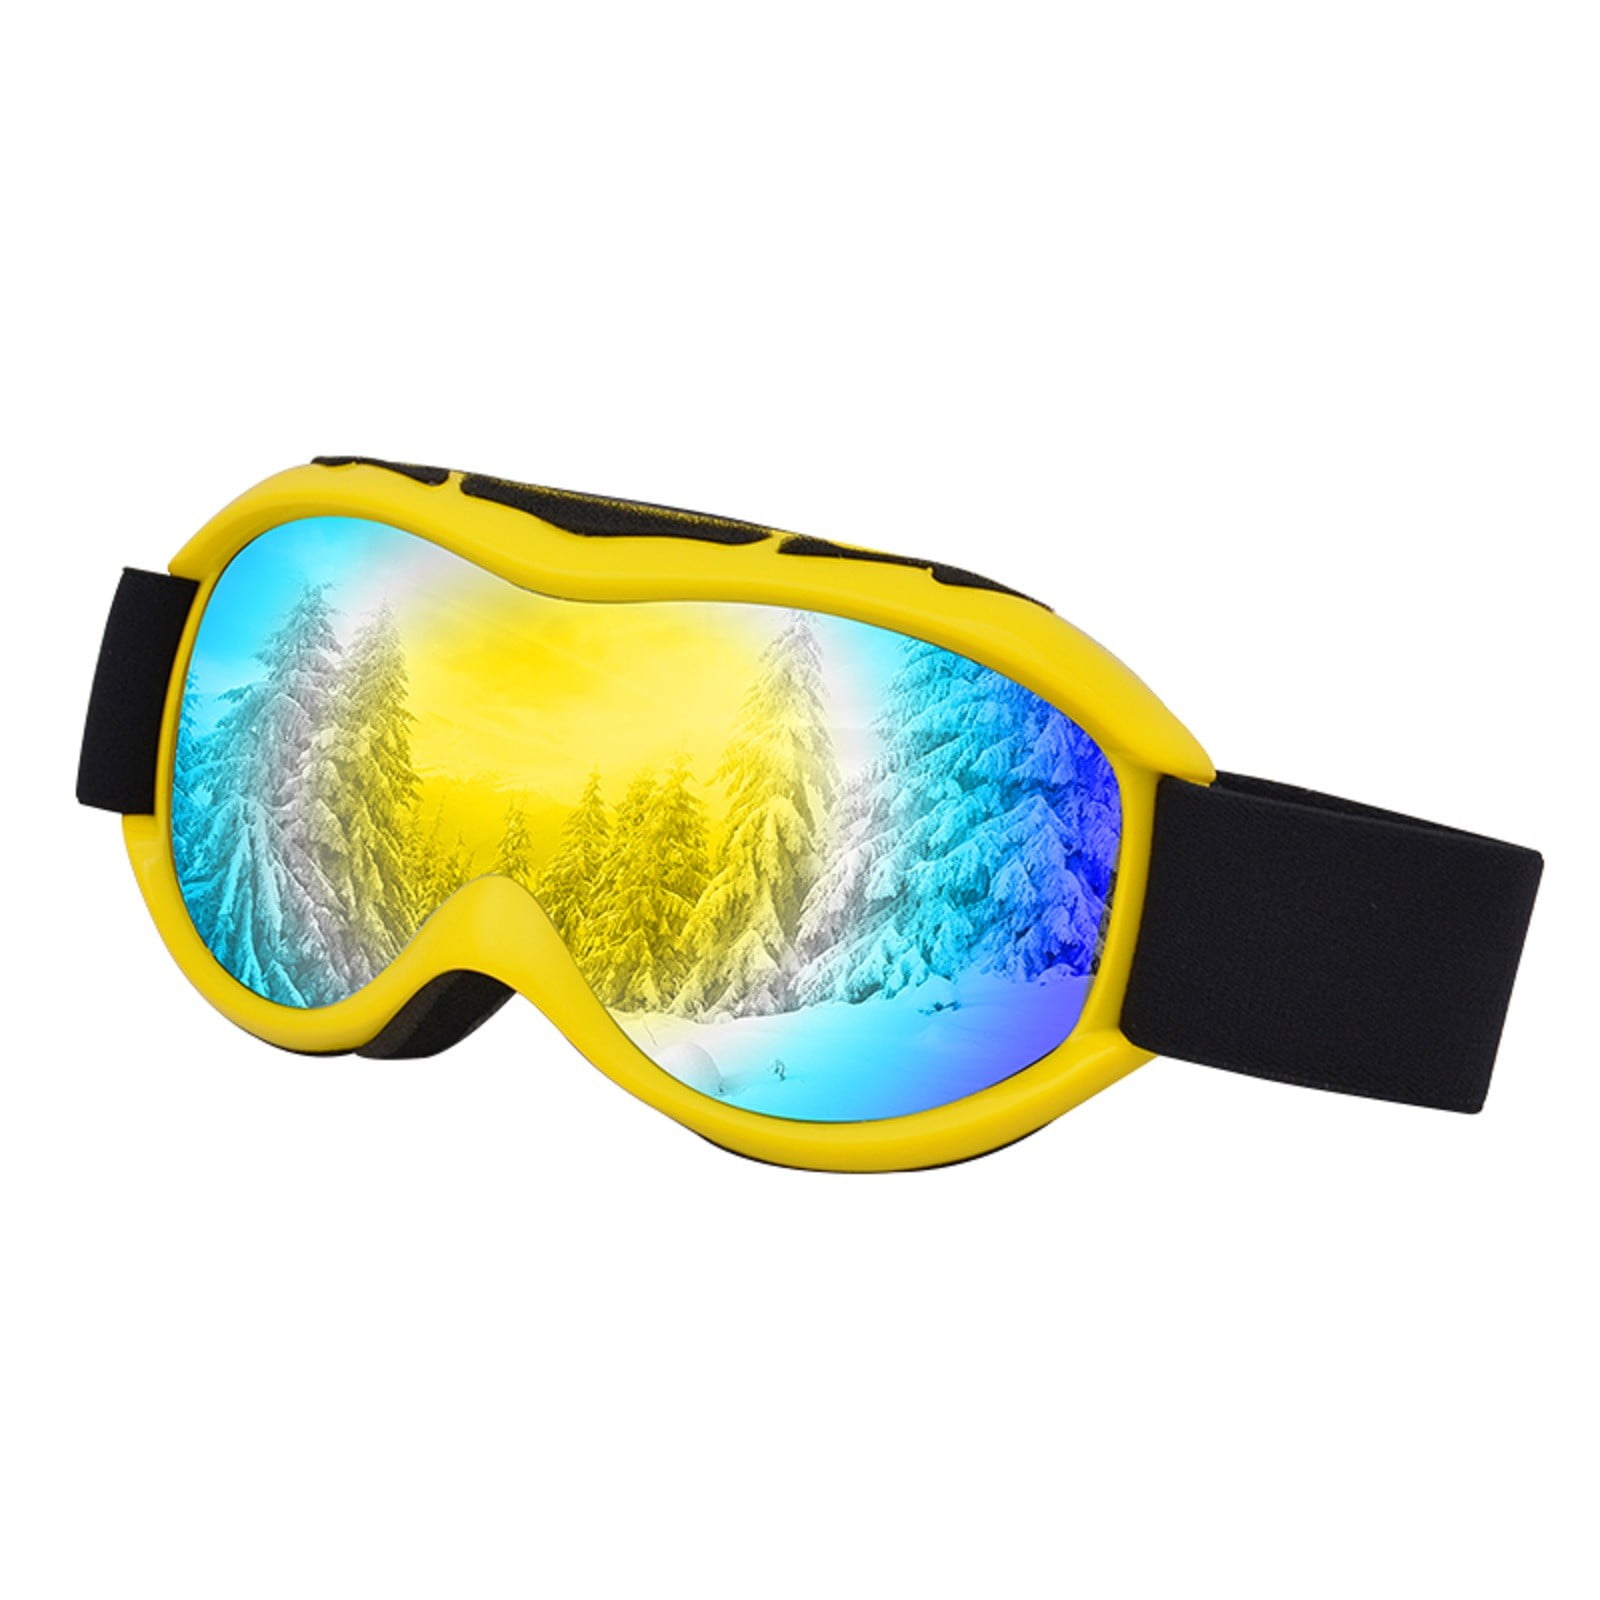 Details about   Ski Goggles Over Glasses Design SNOW/Snowboard Goggle For Men Women & Youth BLUE 